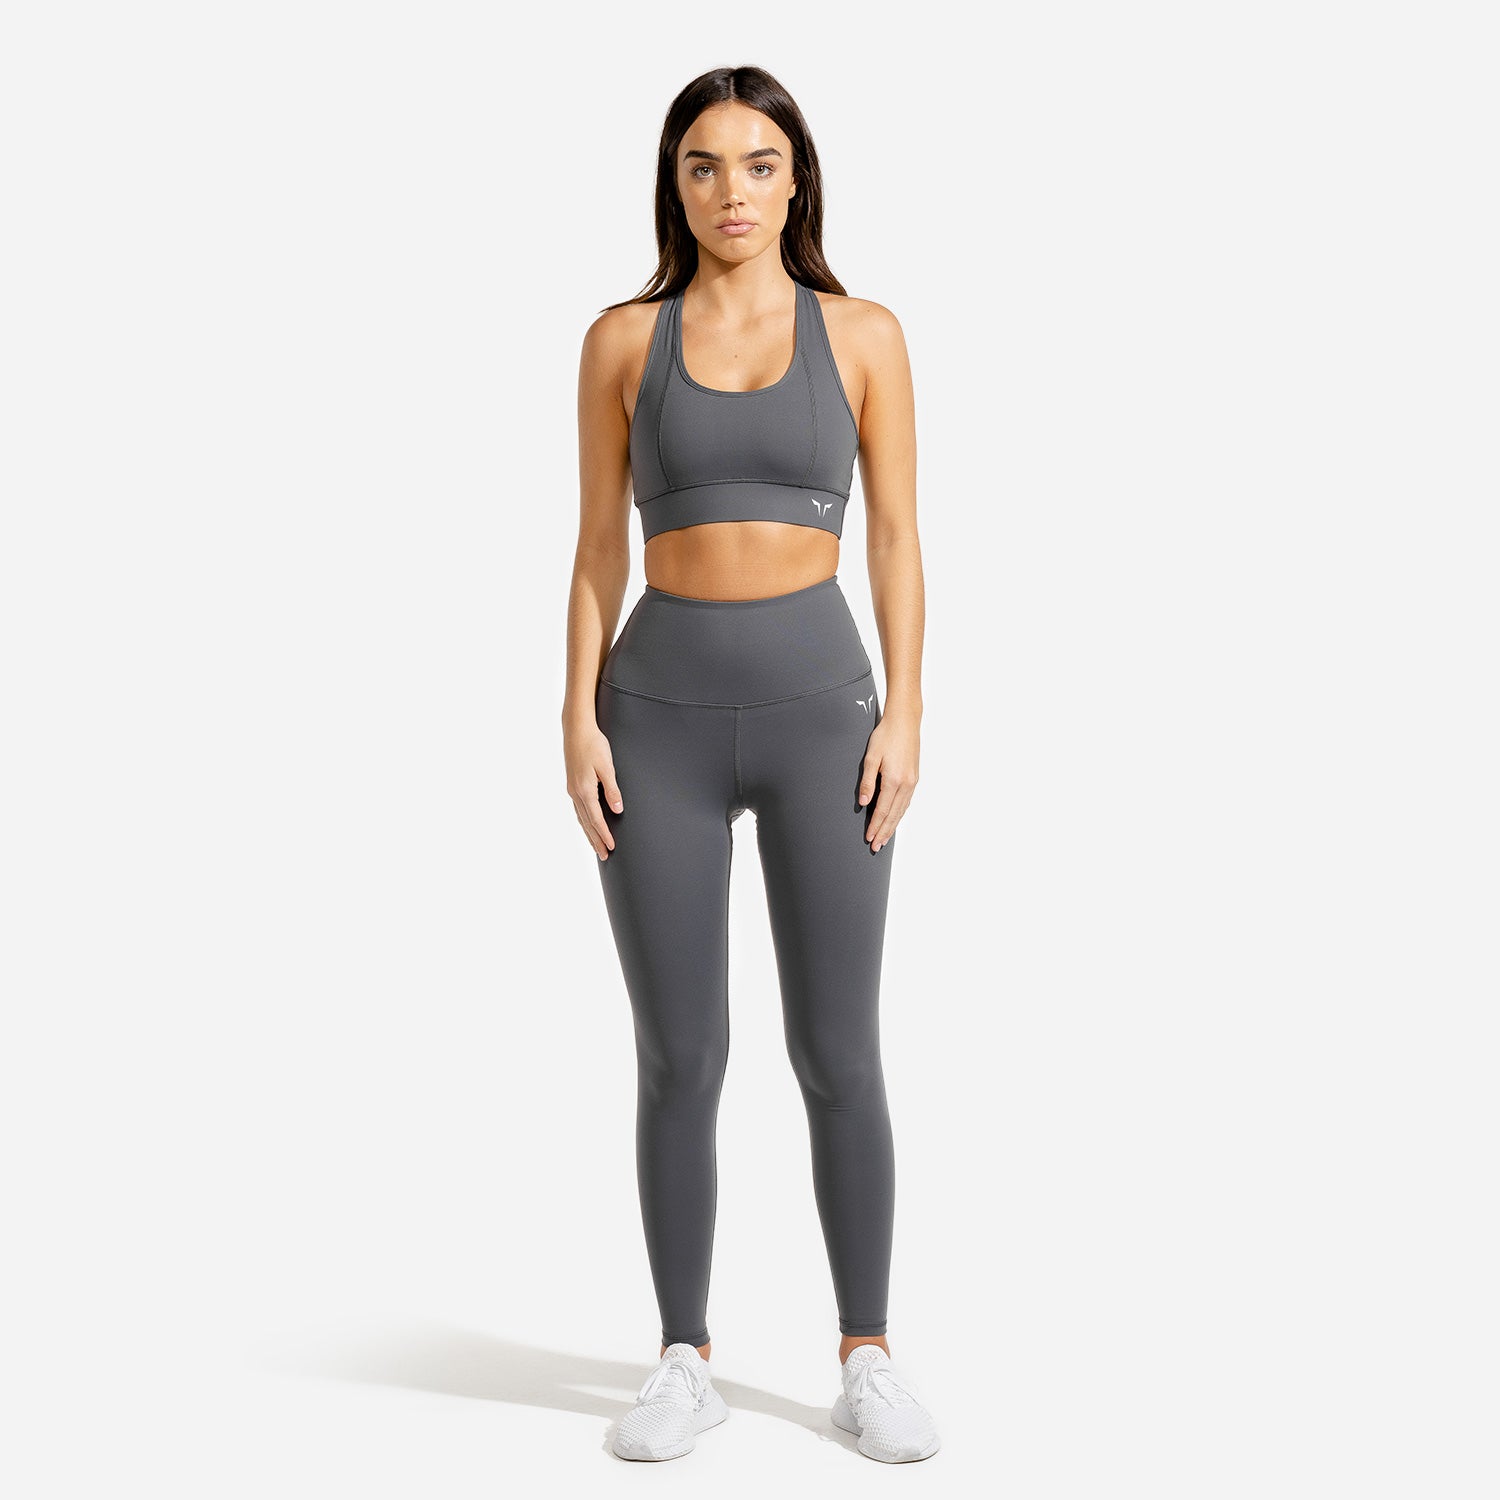 squatwolf-workout-clothes-hera-performance-bra-charcoal-sports-bra-for-gym